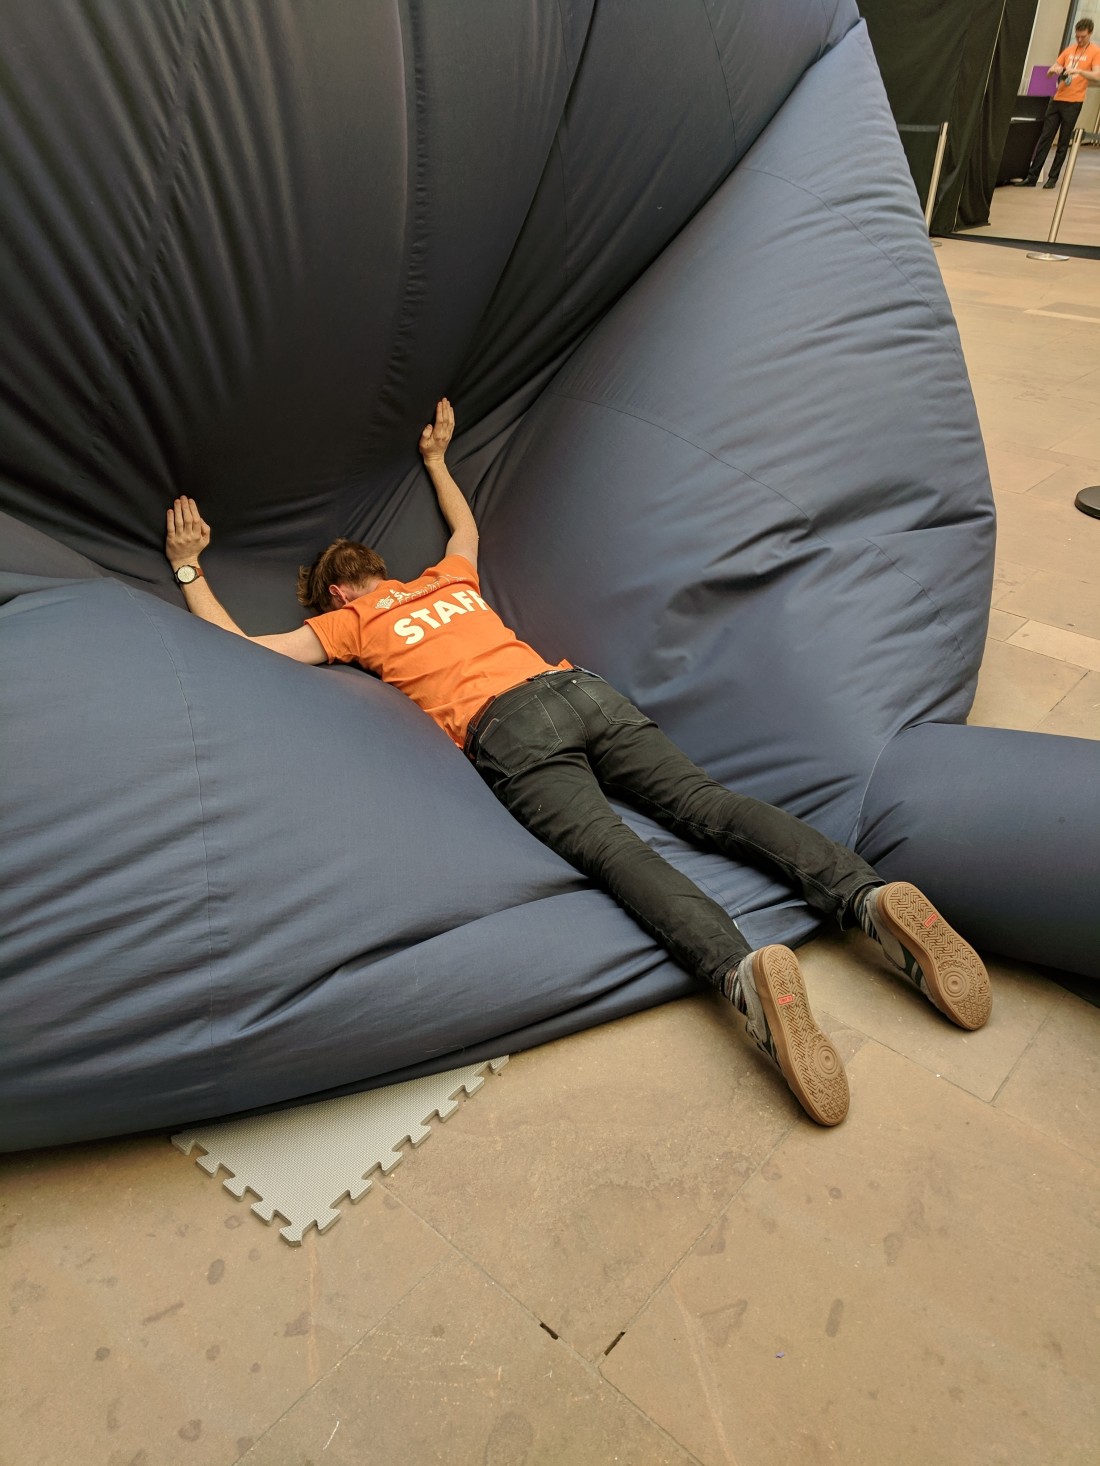 Man in orange shirt facedown flopping on blue cloth inflatable planetarium dome